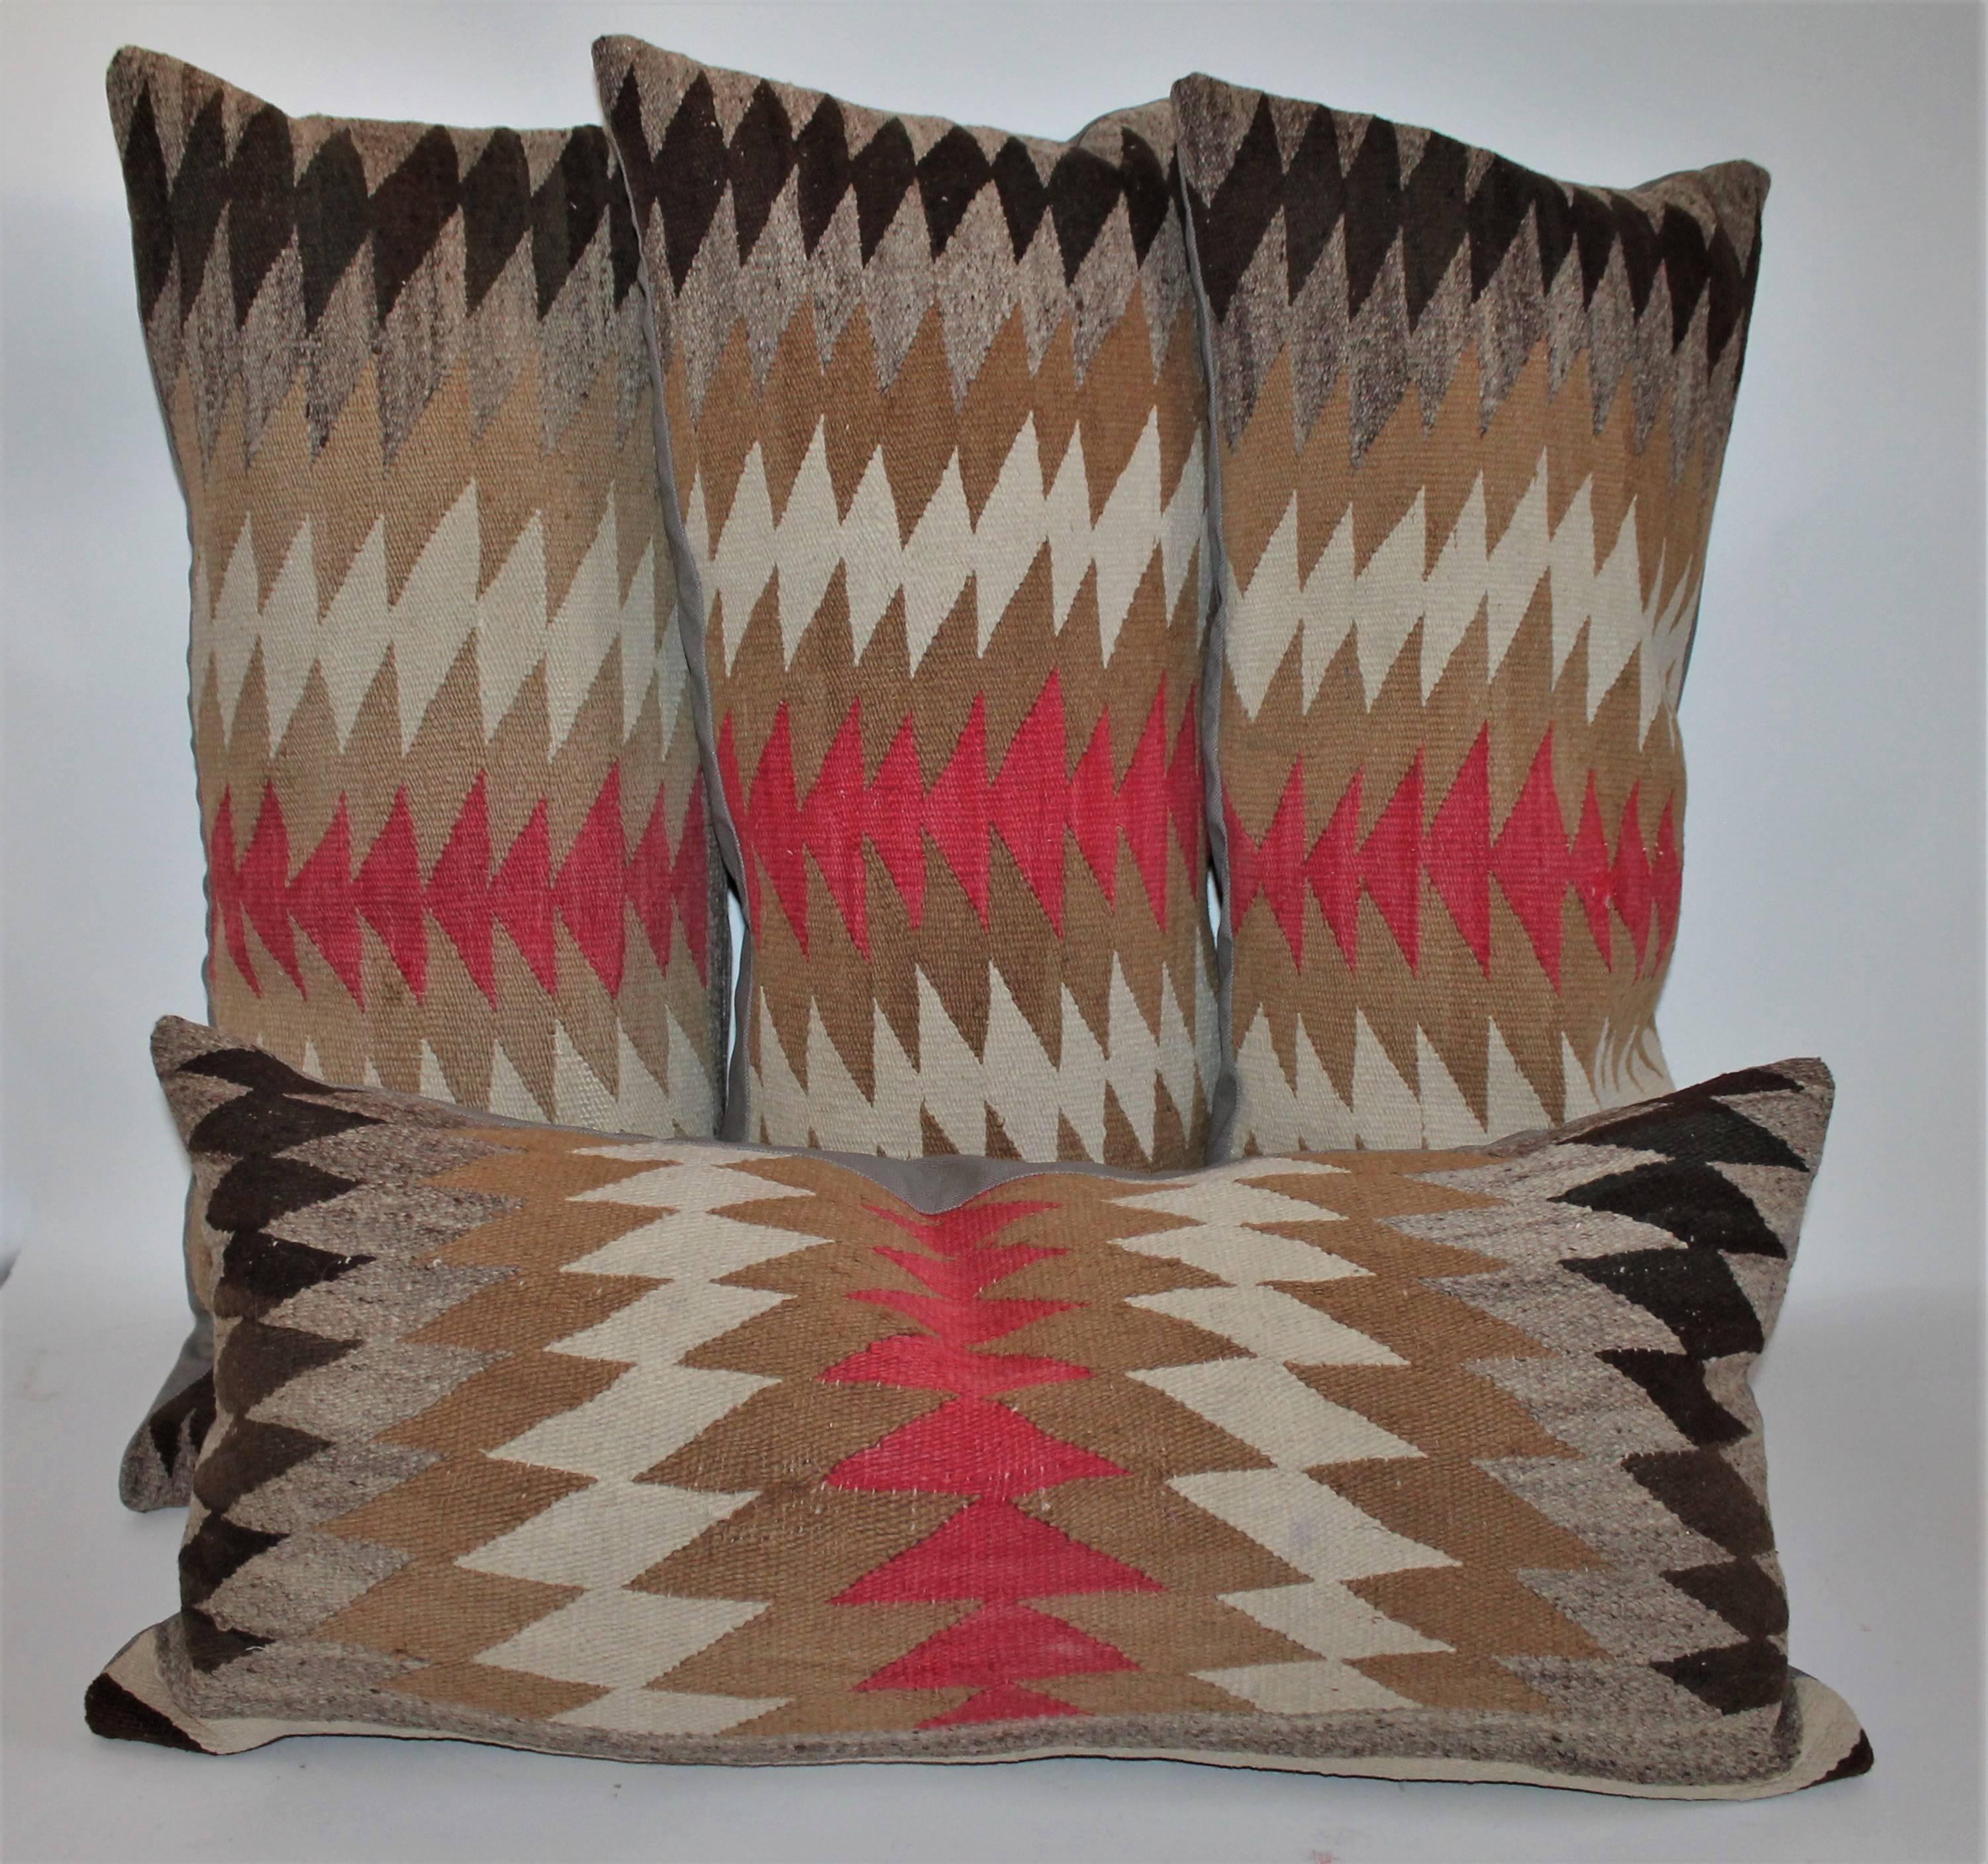 All pillows measure 32 inches wide by 13 inches in height the Navajo weaving's pillows are all in good condition. The backing is in tan cotton linen.
These pillows have a depth of about 5 inches each.